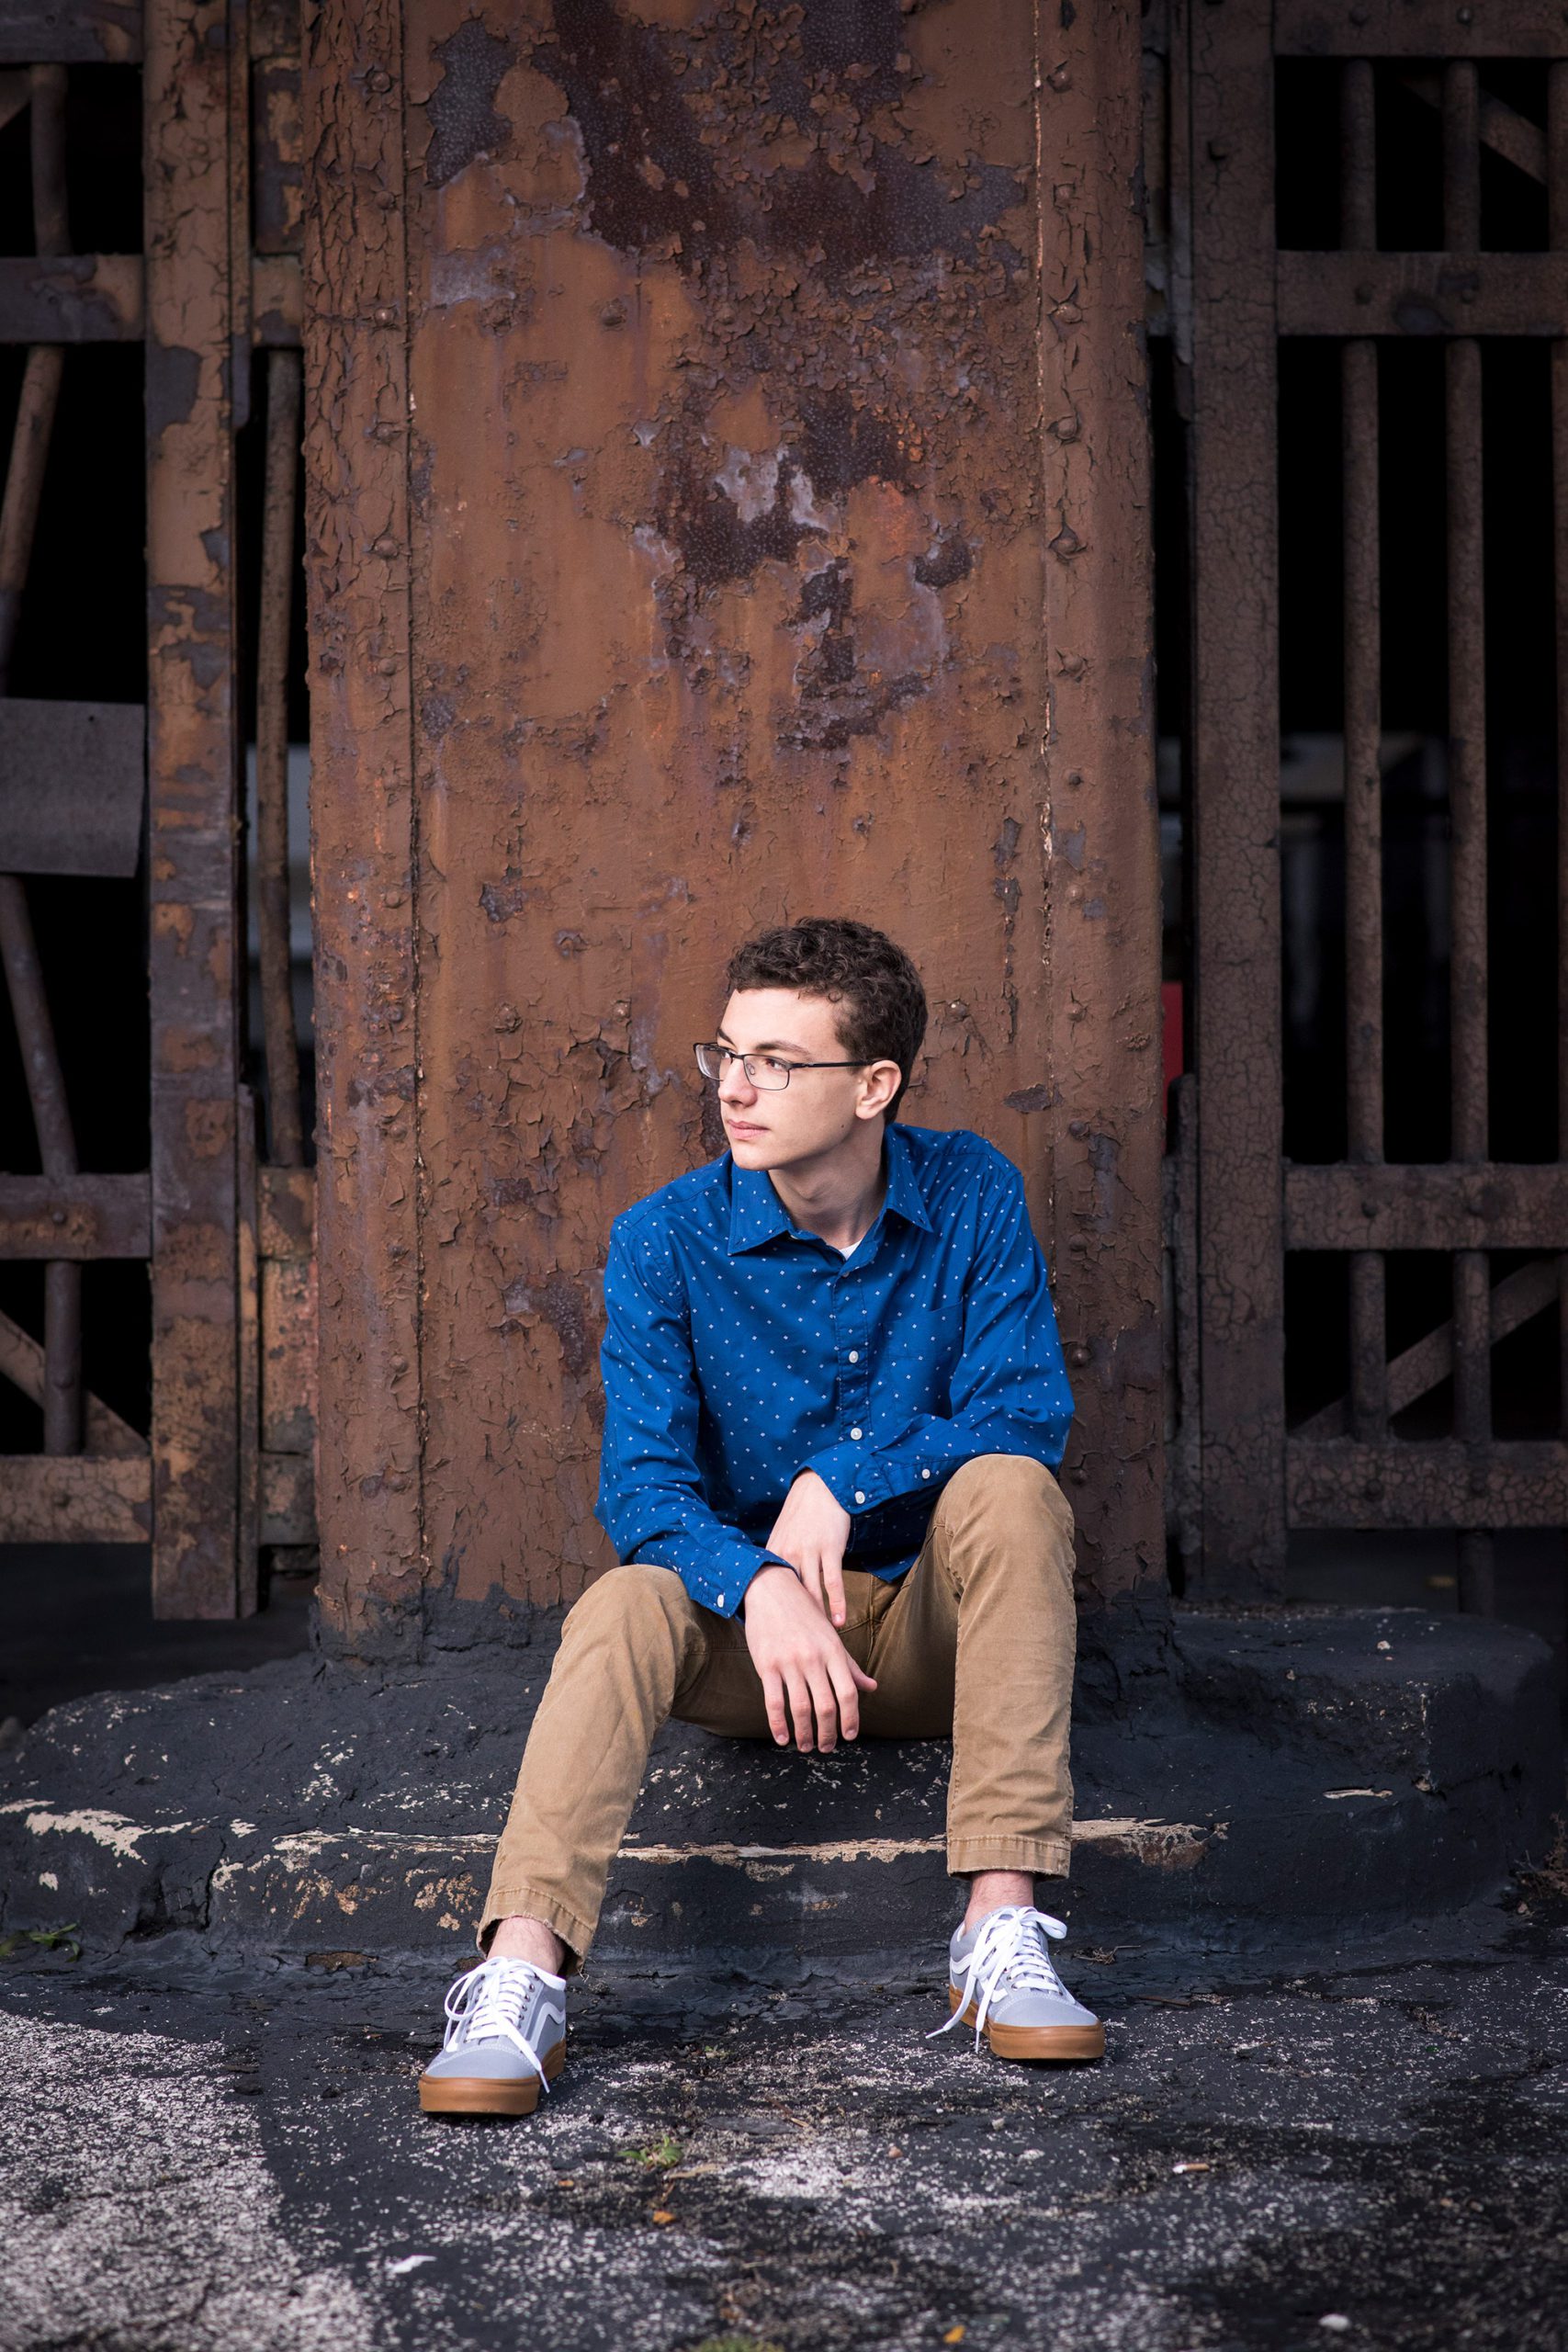 Senior Boy on loading dock of rusted building.